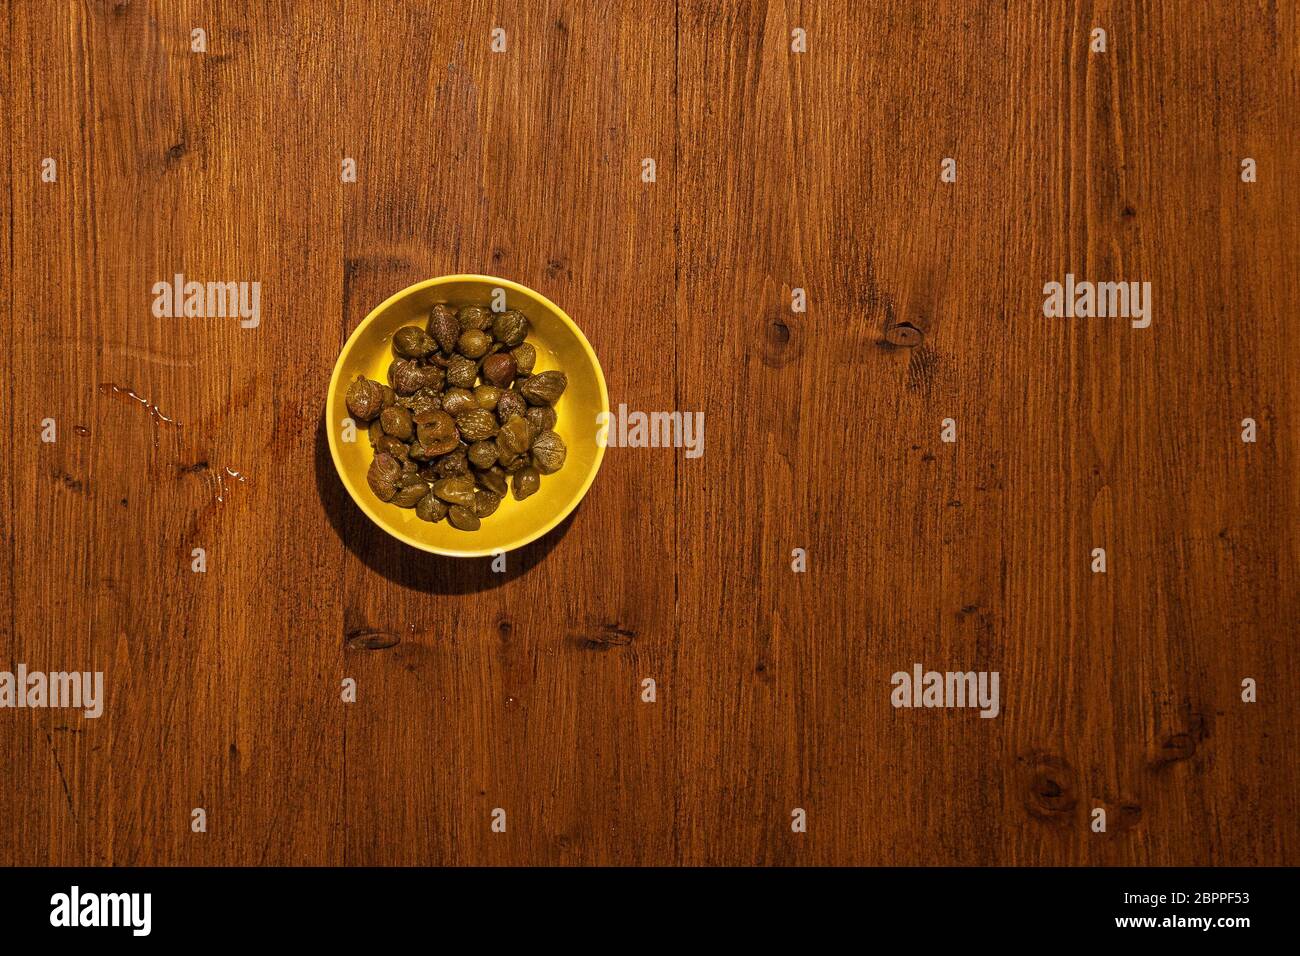 Top view of bowl full of capers on wooden background Stock Photo